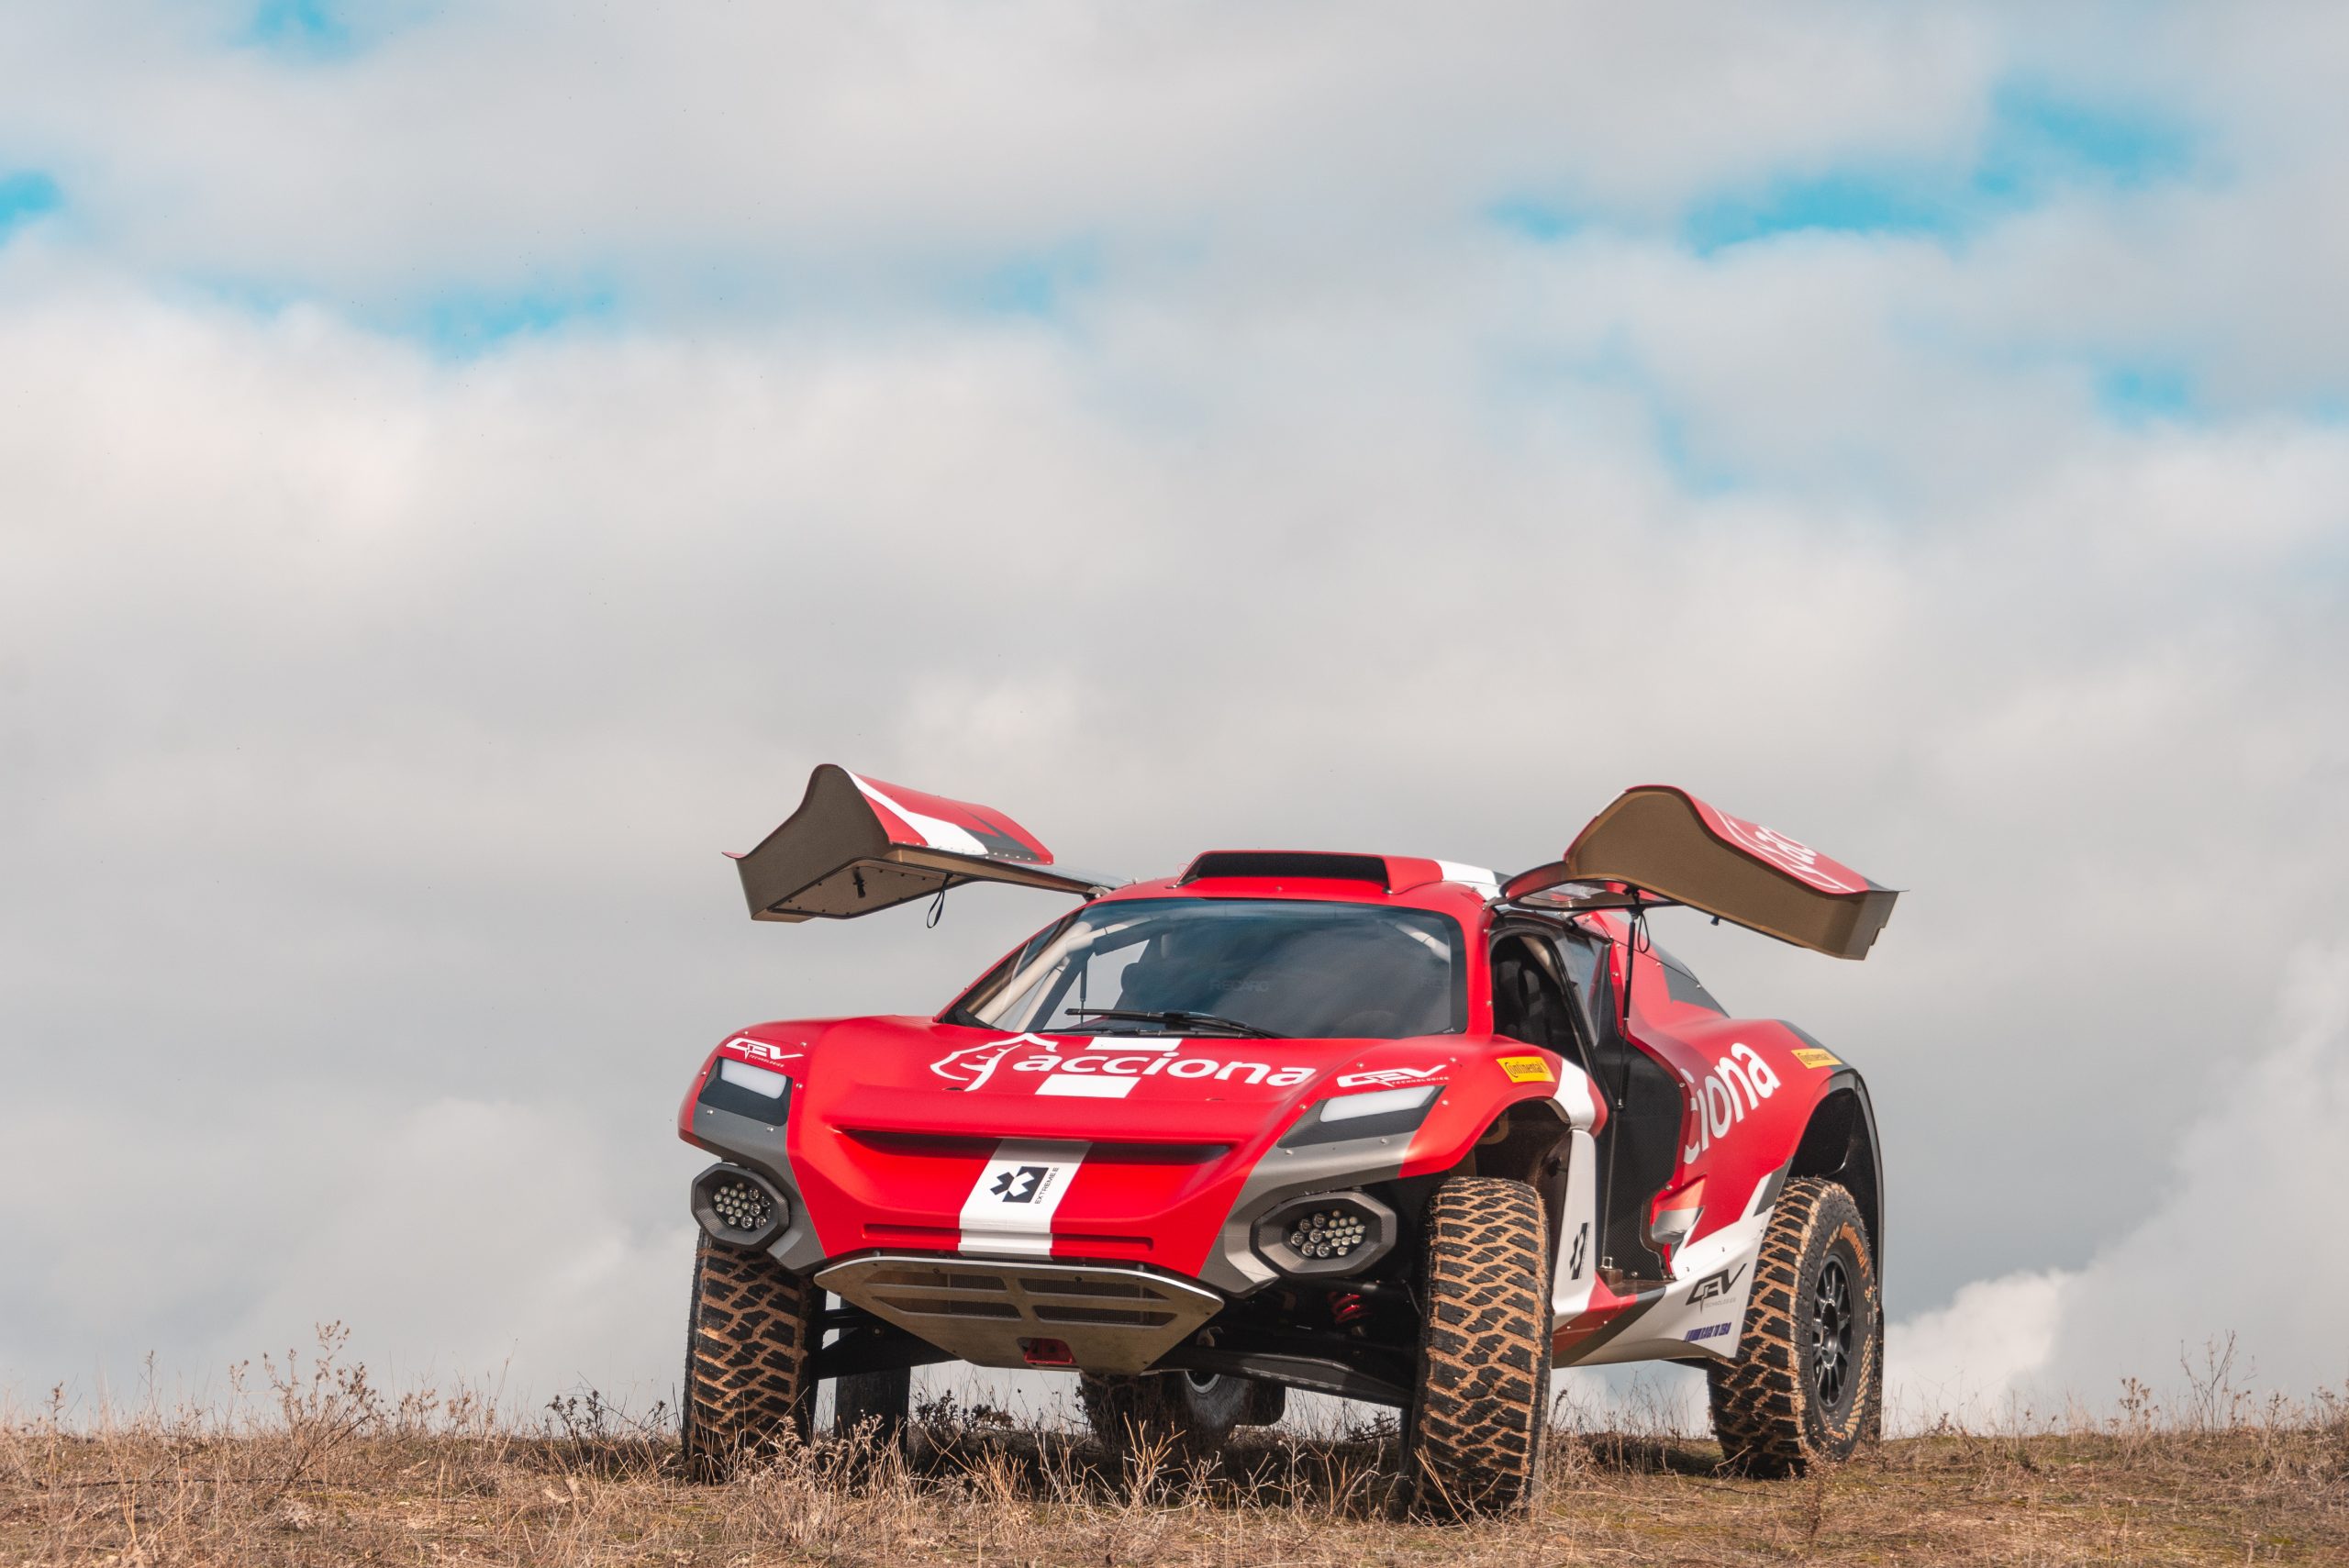 ACCIONA, CARLOS SAINZ AND QEV TECHNOLOGIES TEAM UP TO COMPETE IN EXTREME E, THE NEW SUSTAINABLE OFF-ROAD SUV CHAMPIONSHIP, QEV